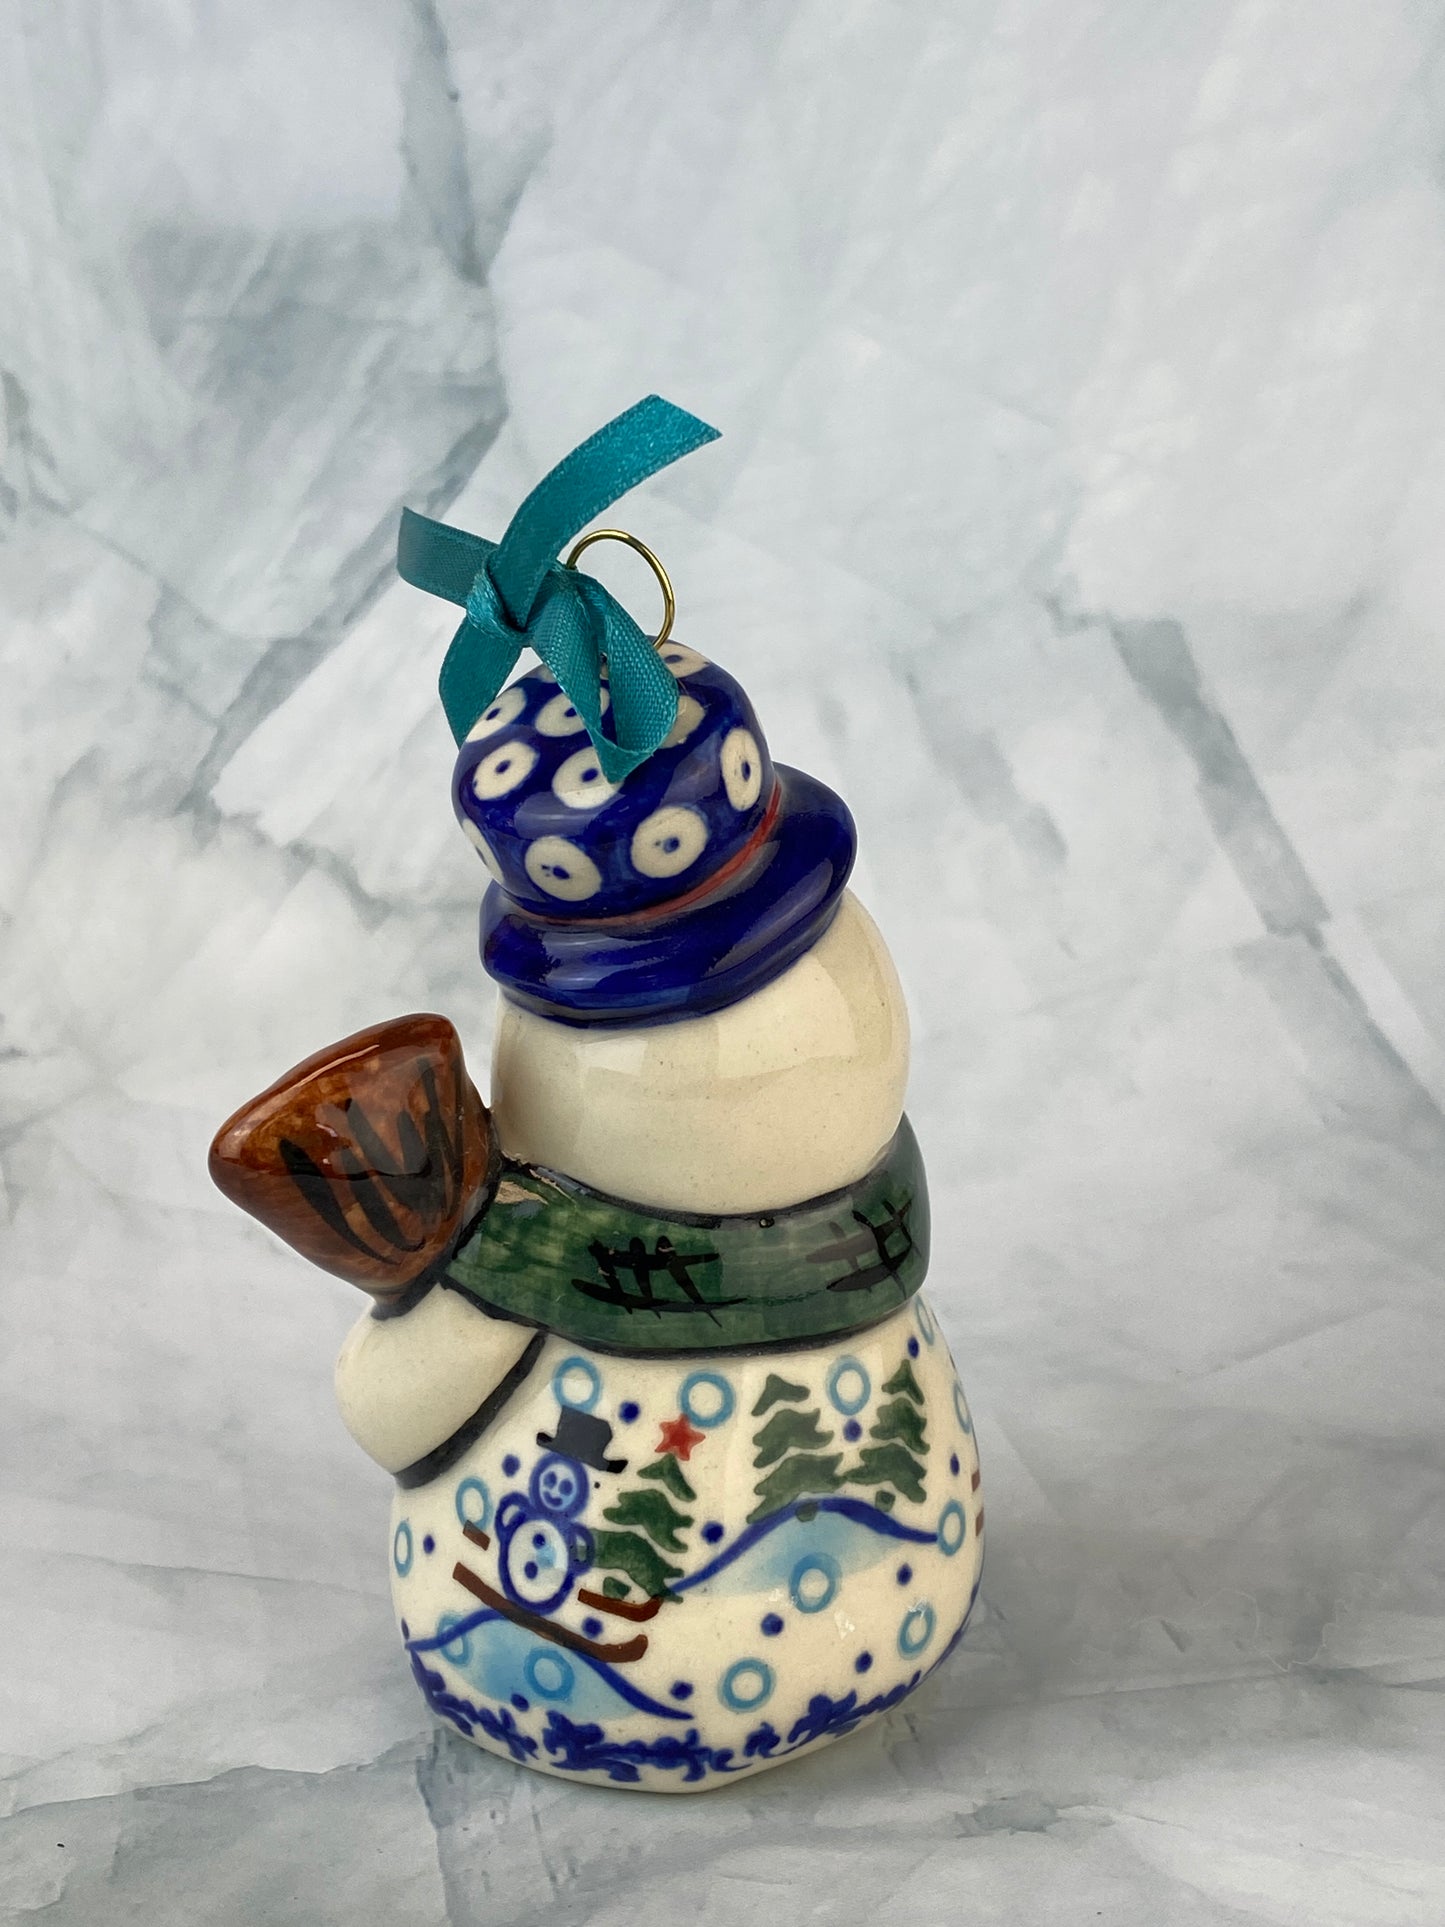 Vena Standing Snowman Ornament - Shape V354 - Green Scarf and Skiing Snowman